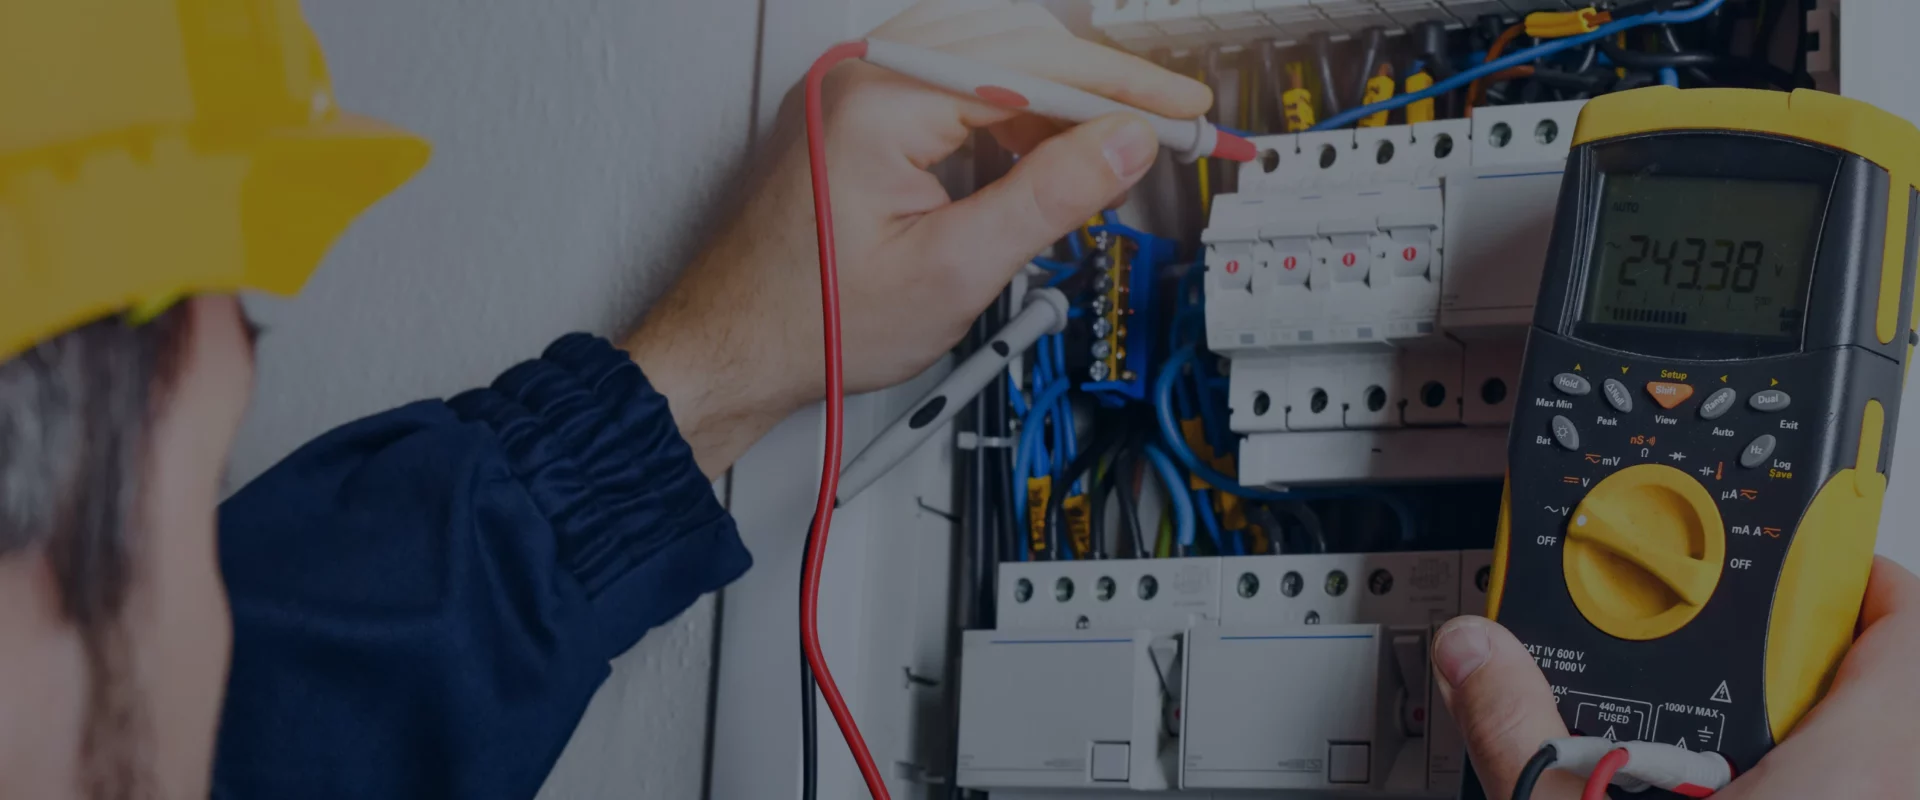 technician-test-the-newly-installed-electrical-peoria